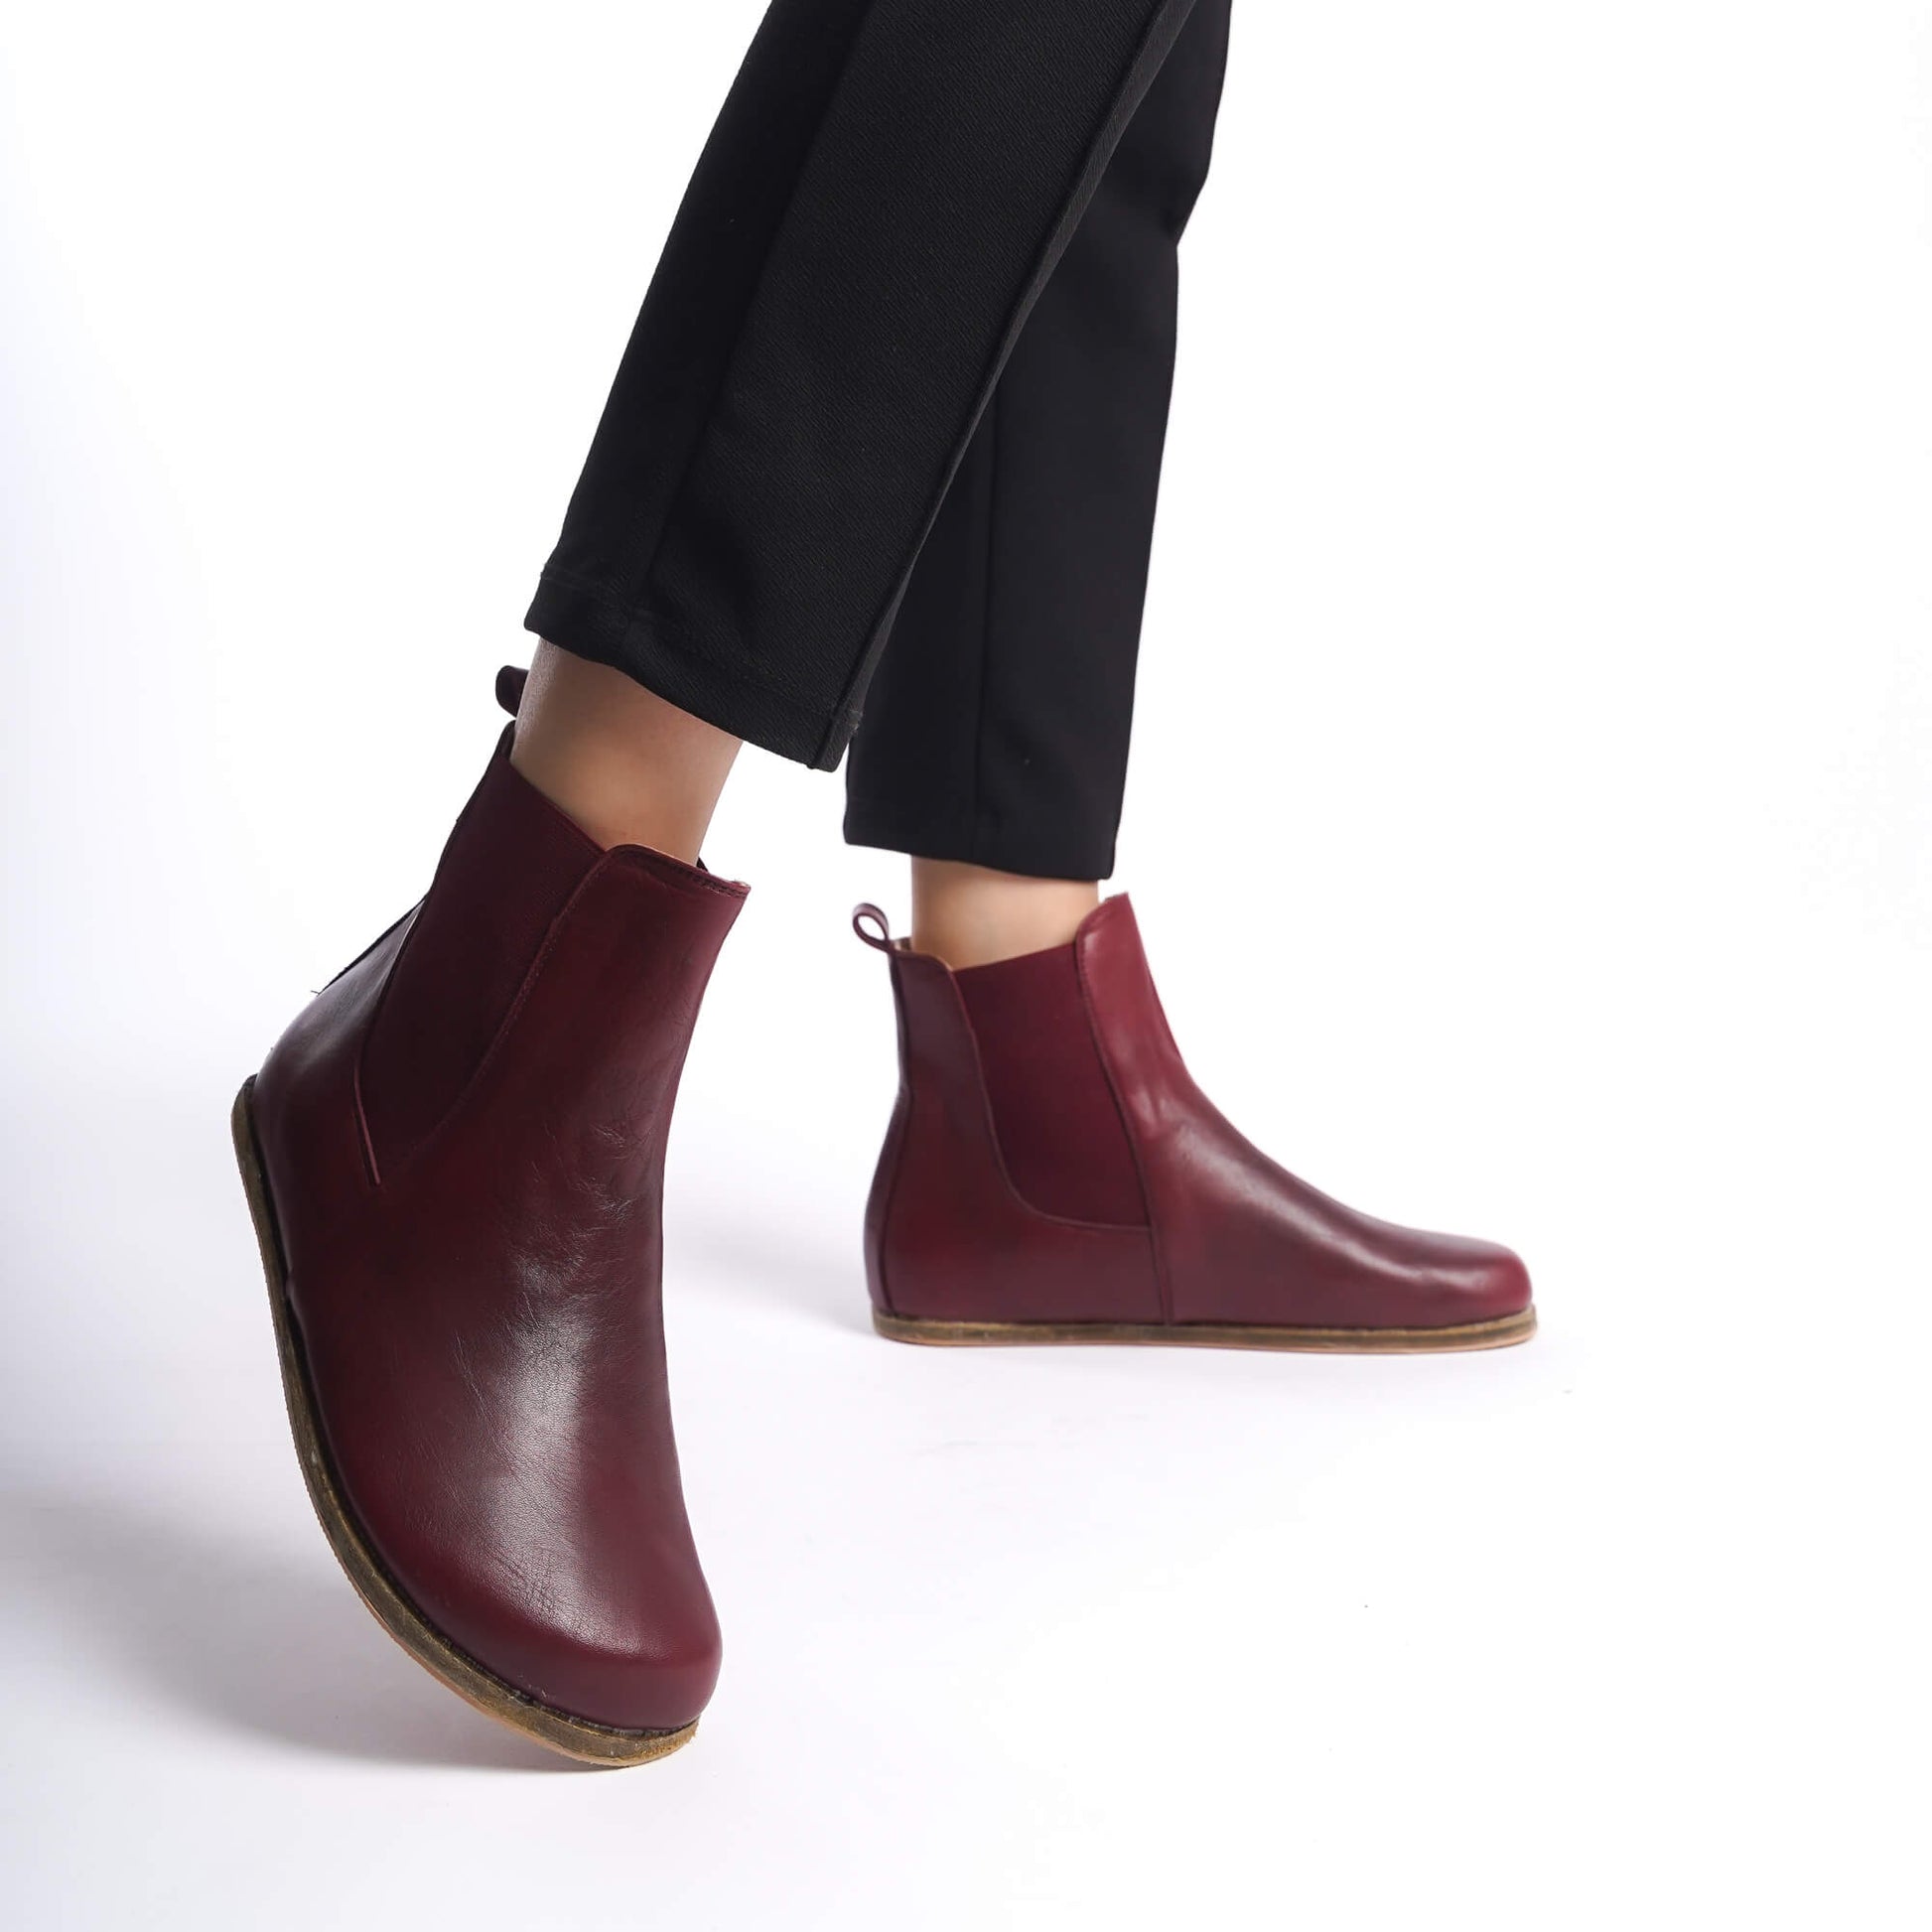 Women's burgundy Chelsea boots designed with a wide toe box, crafted from high-quality natural leather. Combining elegance with comfort.